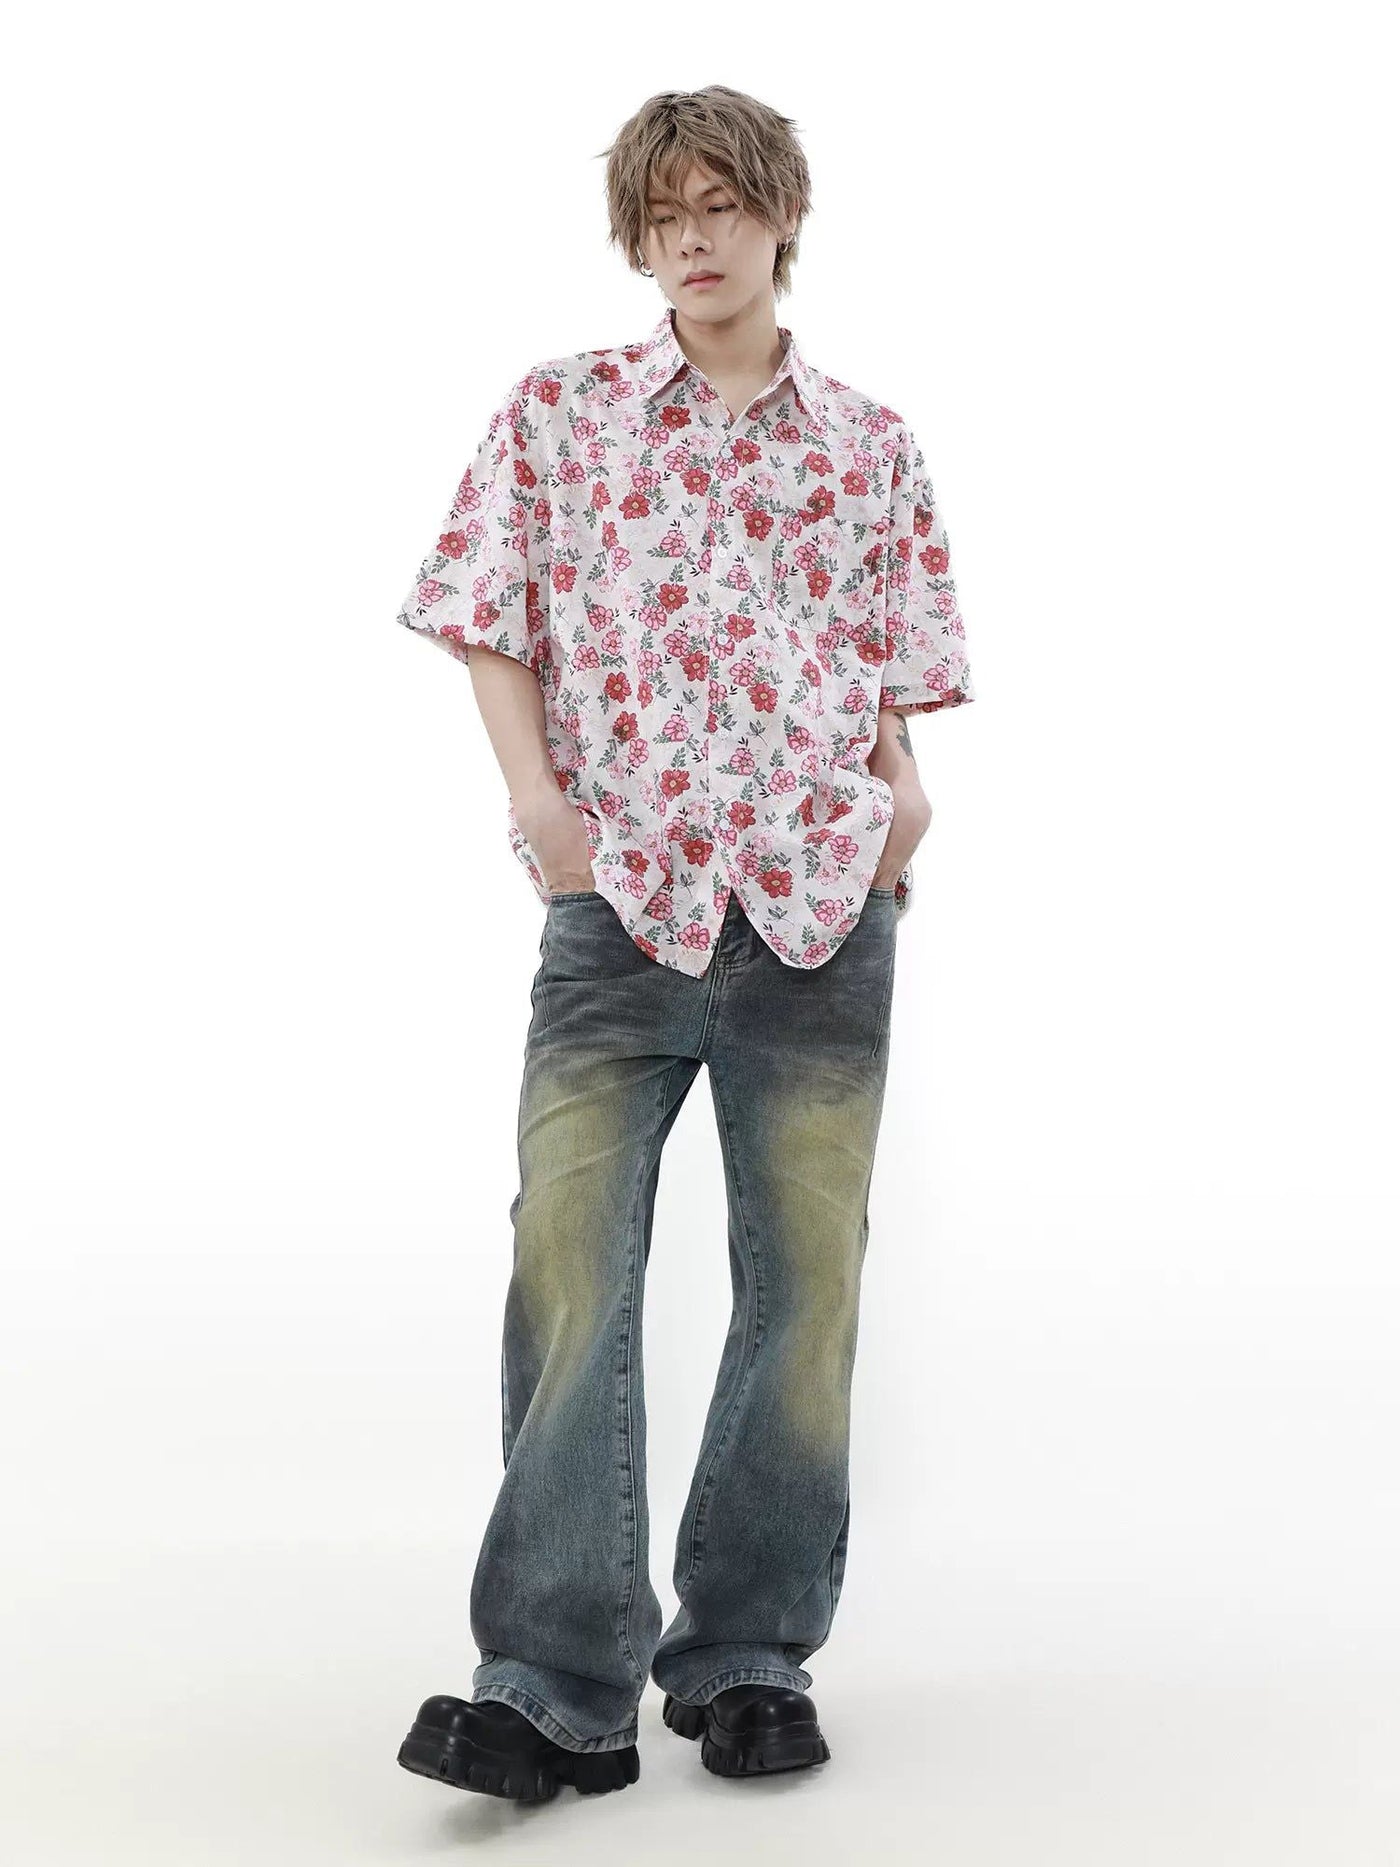 Vintage Red Floral Shirt Korean Street Fashion Shirt By Mr Nearly Shop Online at OH Vault